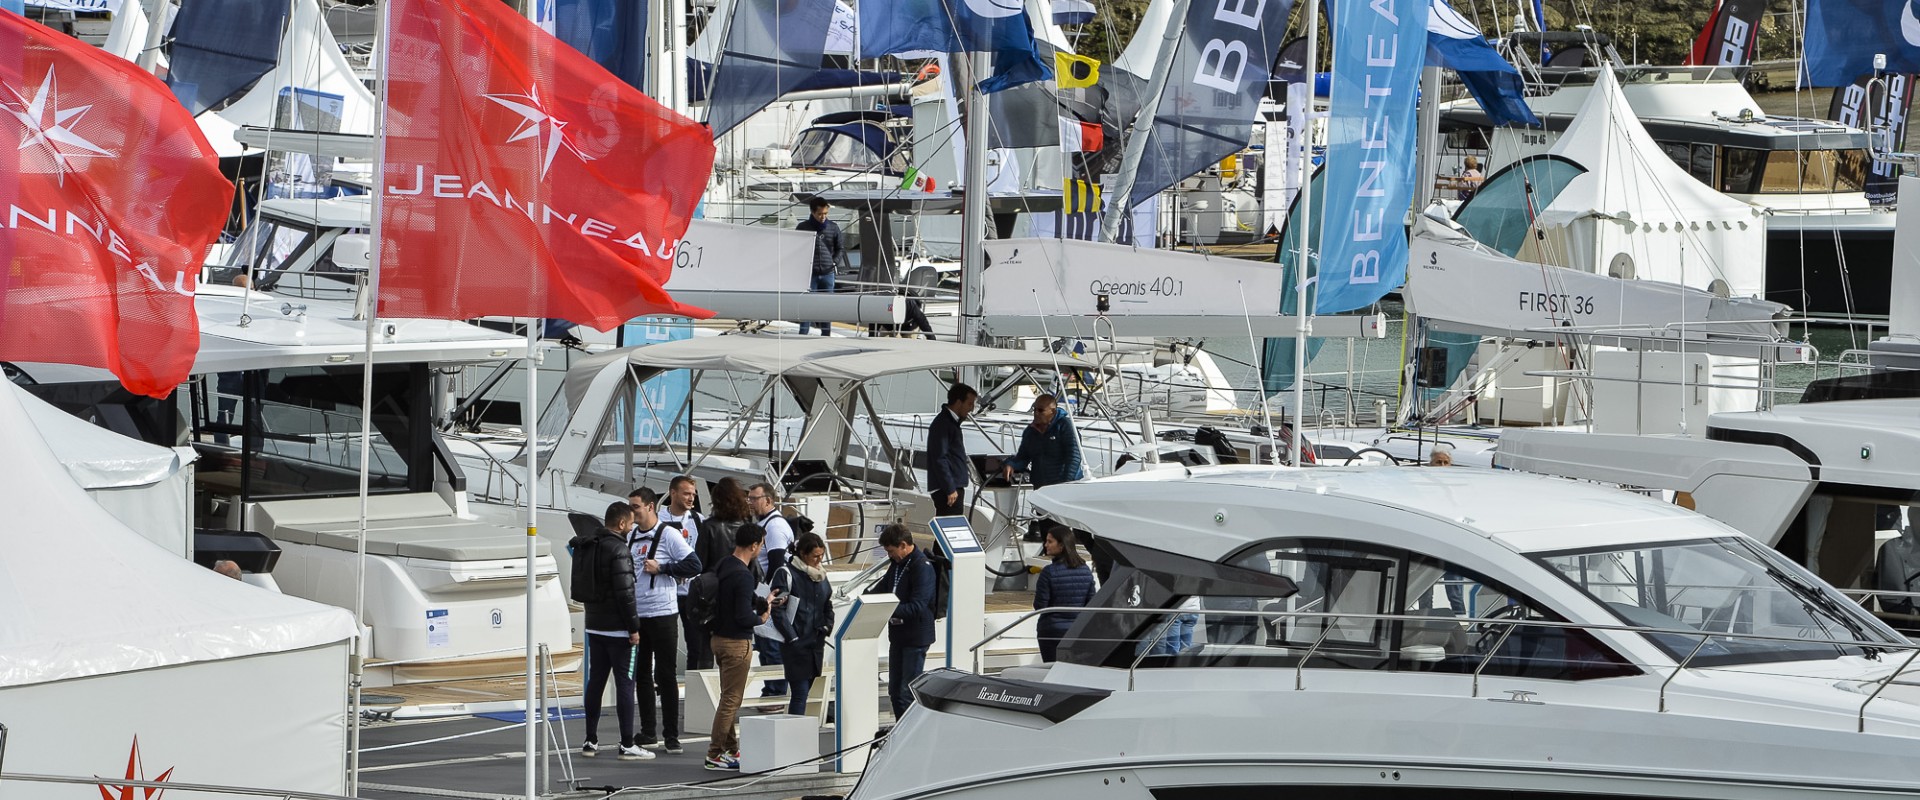 Visit by the Development Directorate to Grand Pavois Boat Show in La Rochelle